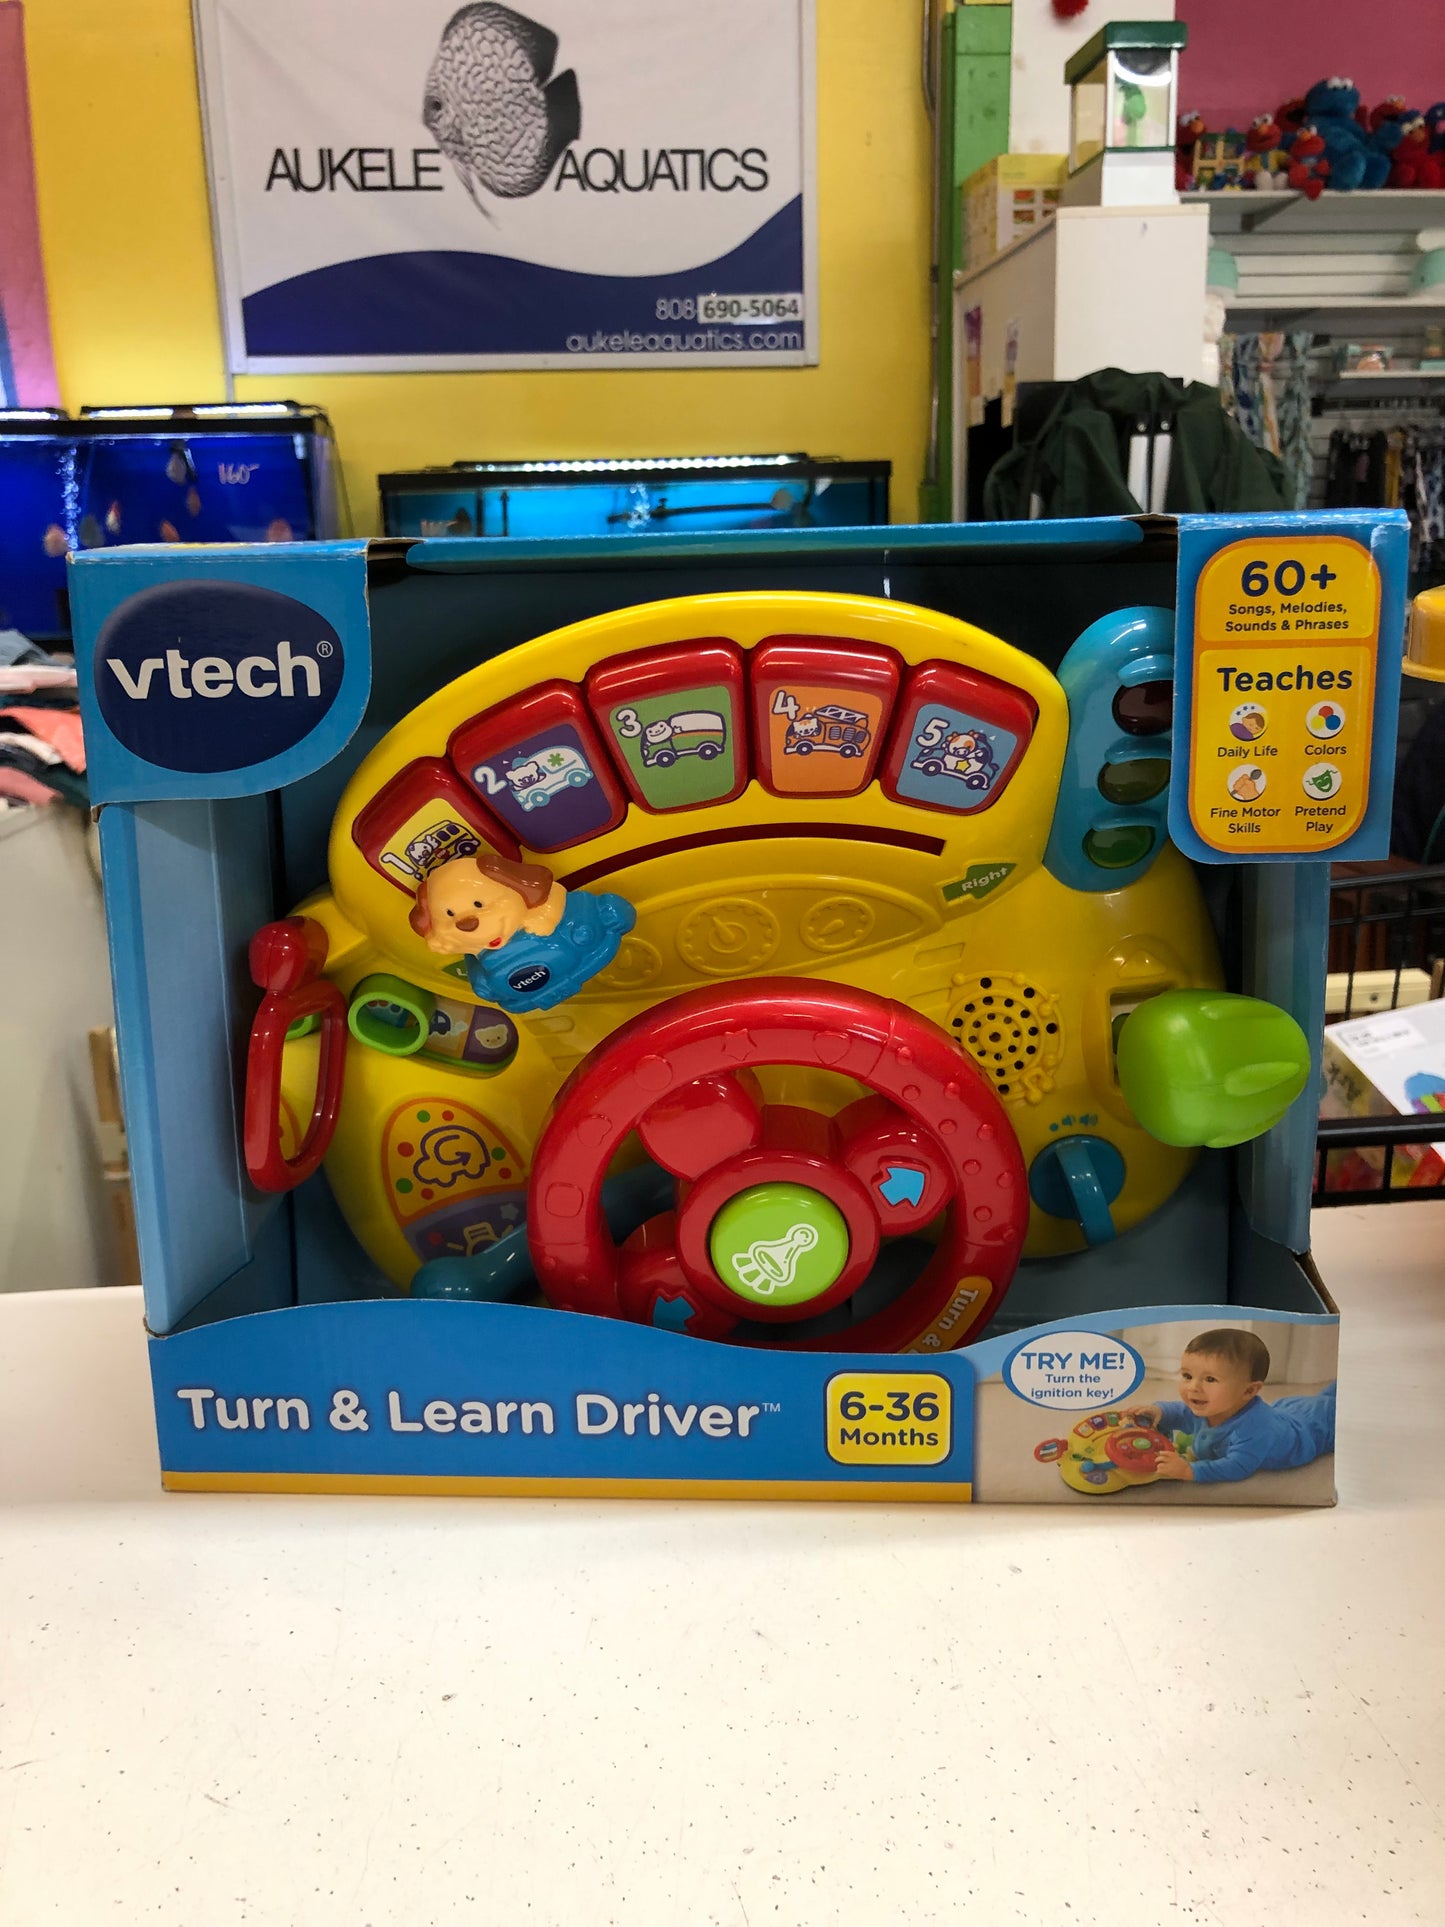 New Vtech Turn & Learn Driver